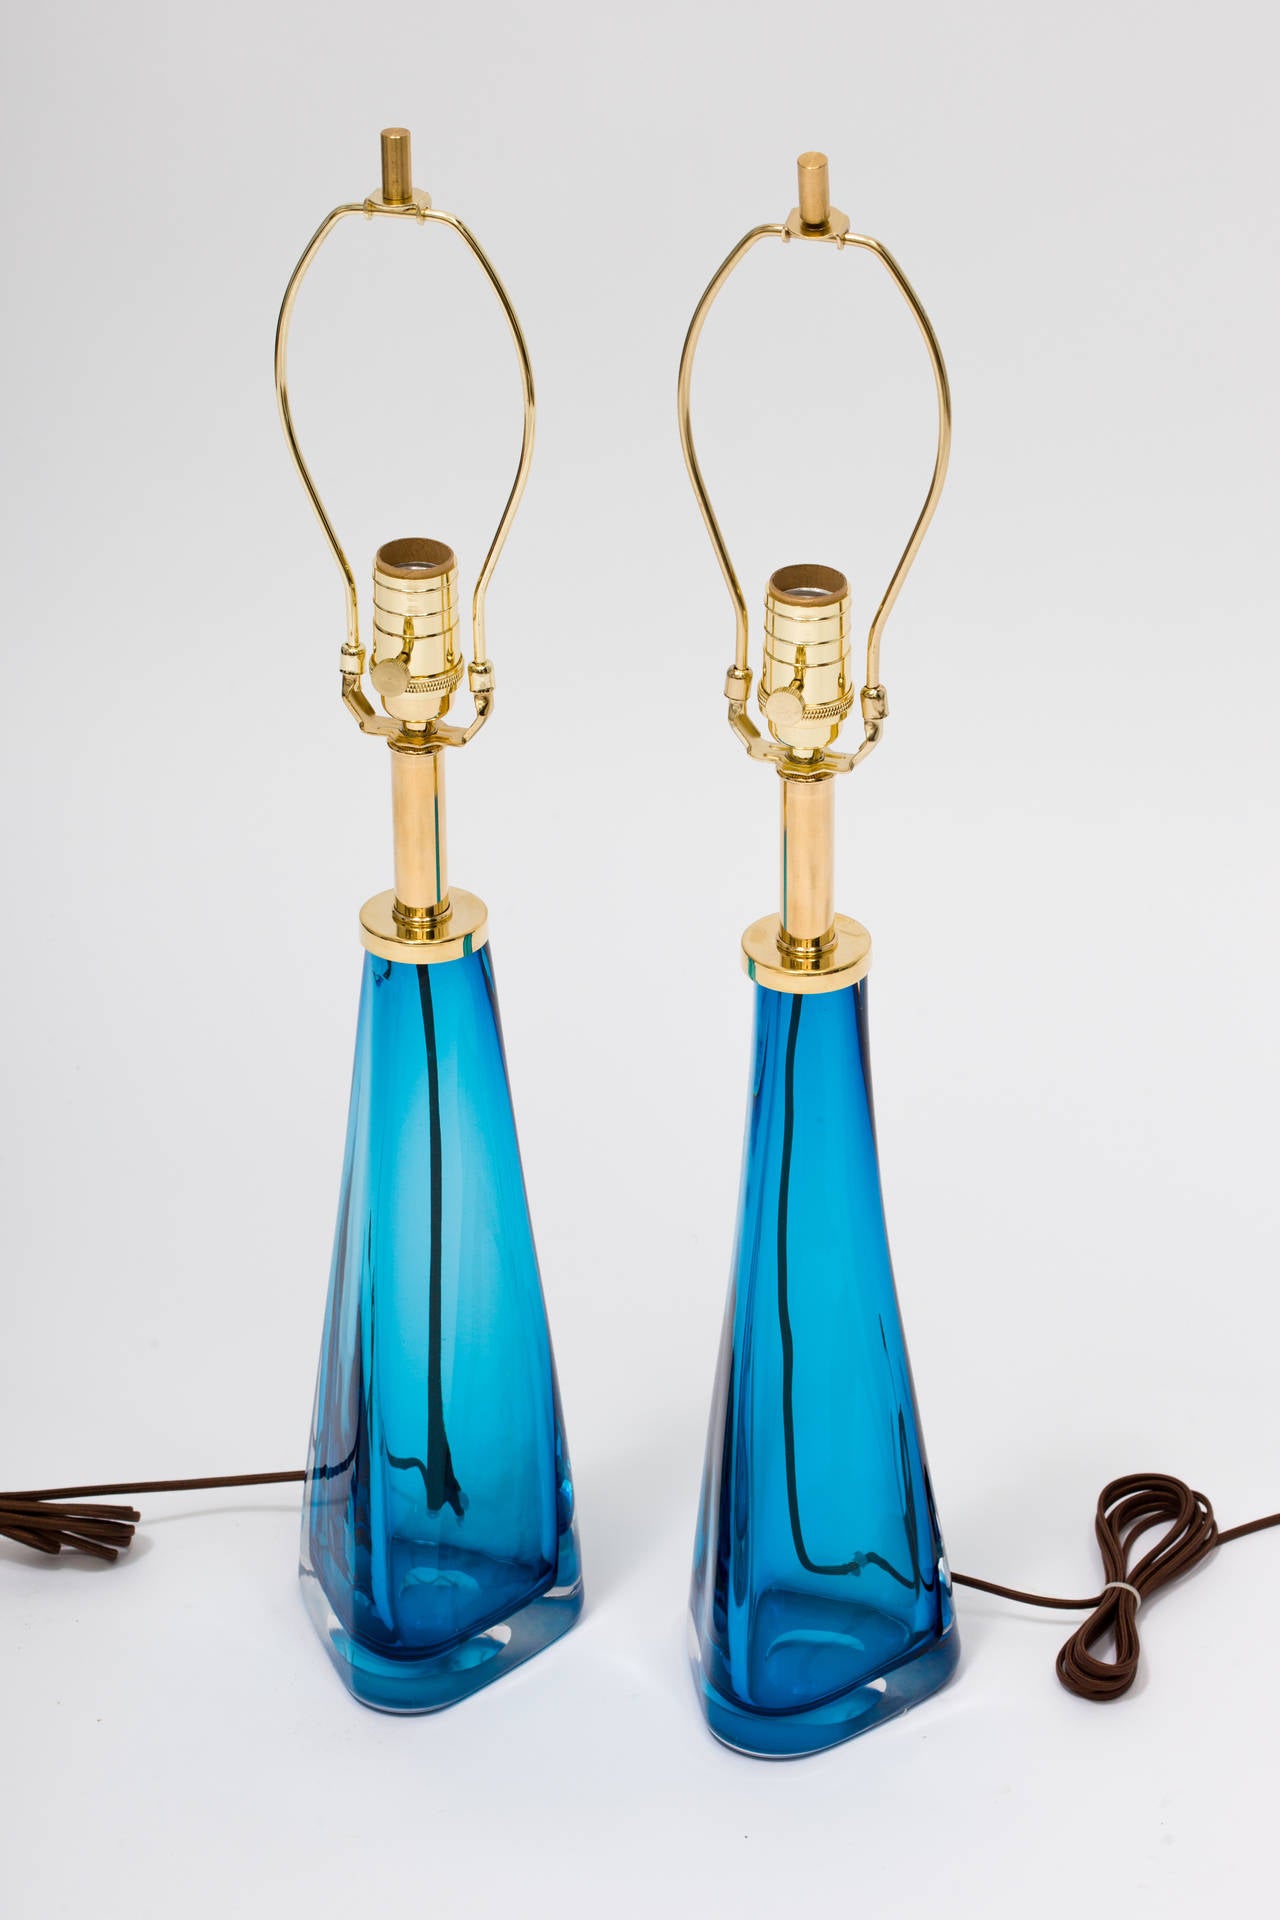 A pair of blue glass lamps with thick clear glass casing with brass hardware in the Manner of Nils Landberg for Orrefors
These are made to order.